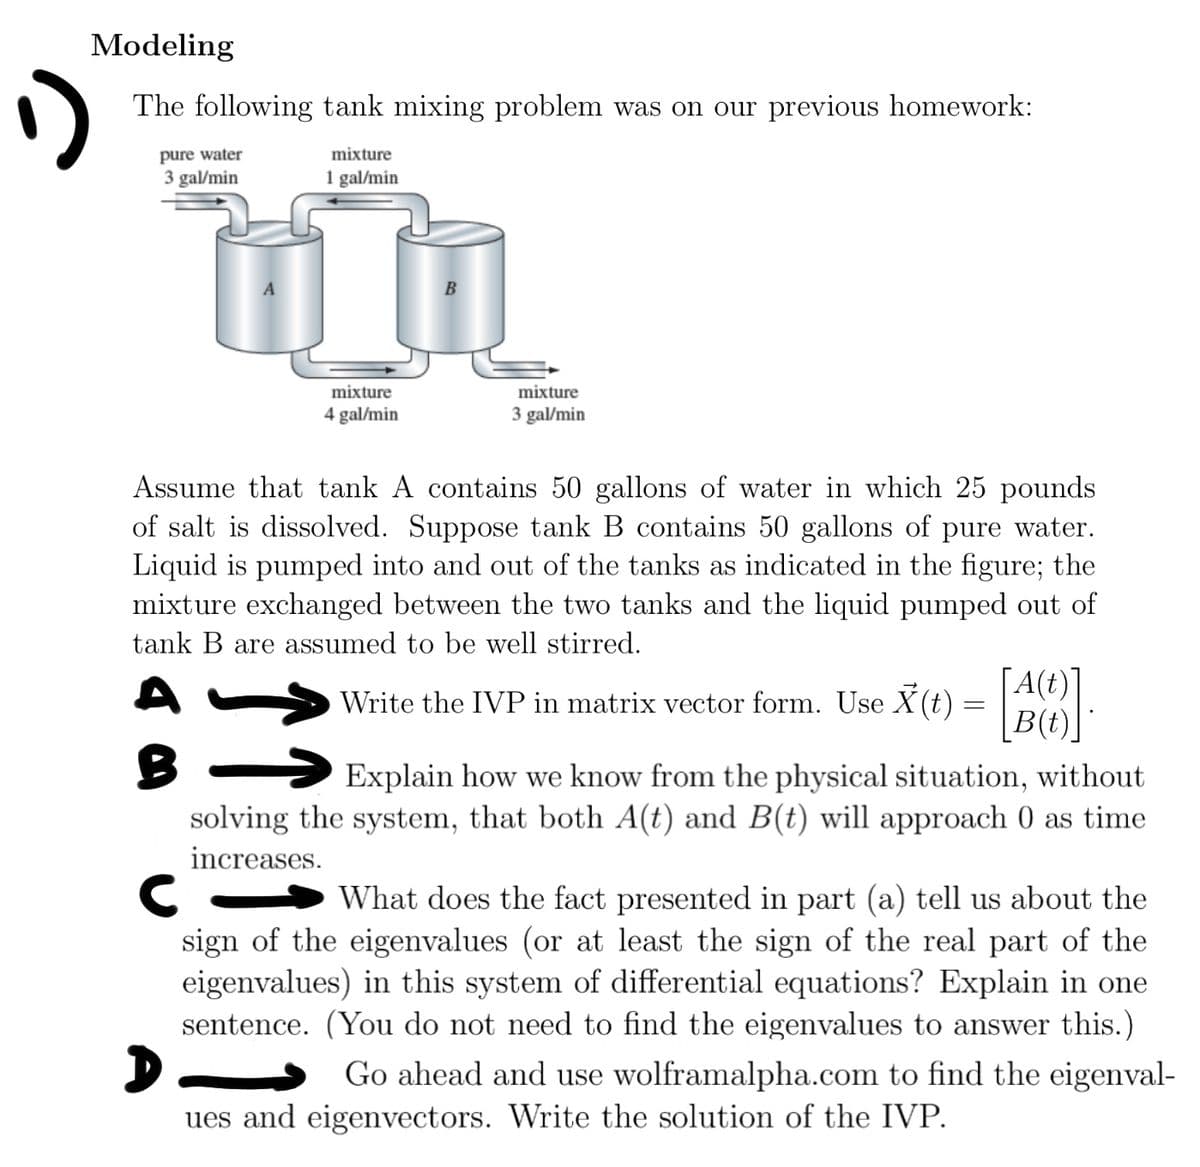 Modeling
The following tank mixing problem was on our previous homework:
pure water
3 gal/min
mixture
1 gal/min
mixture
4 gal/min
mixture
3 gal/min
Assume that tank A contains 50 gallons of water in which 25 pounds
of salt is dissolved. Suppose tank B contains 50 gallons of pure water.
Liquid is pumped into and out of the tanks as indicated in the figure; the
mixture exchanged between the two tanks and the liquid pumped out of
tank B are assumed to be well stirred.
A(t)
Write the IVP in matrix vector form. Use X(t) = []
Explain how we know from the physical situation, without
solving the system, that both A(t) and B(t) will approach 0 as time
increases.
C
What does the fact presented in part (a) tell us about the
sign of the eigenvalues (or at least the sign of the real part of the
eigenvalues) in this system of differential equations? Explain in one
sentence. (You do not need to find the eigenvalues to answer this.)
D
Go ahead and use wolframalpha.com to find the eigenval-
ues and eigenvectors. Write the solution of the IVP.